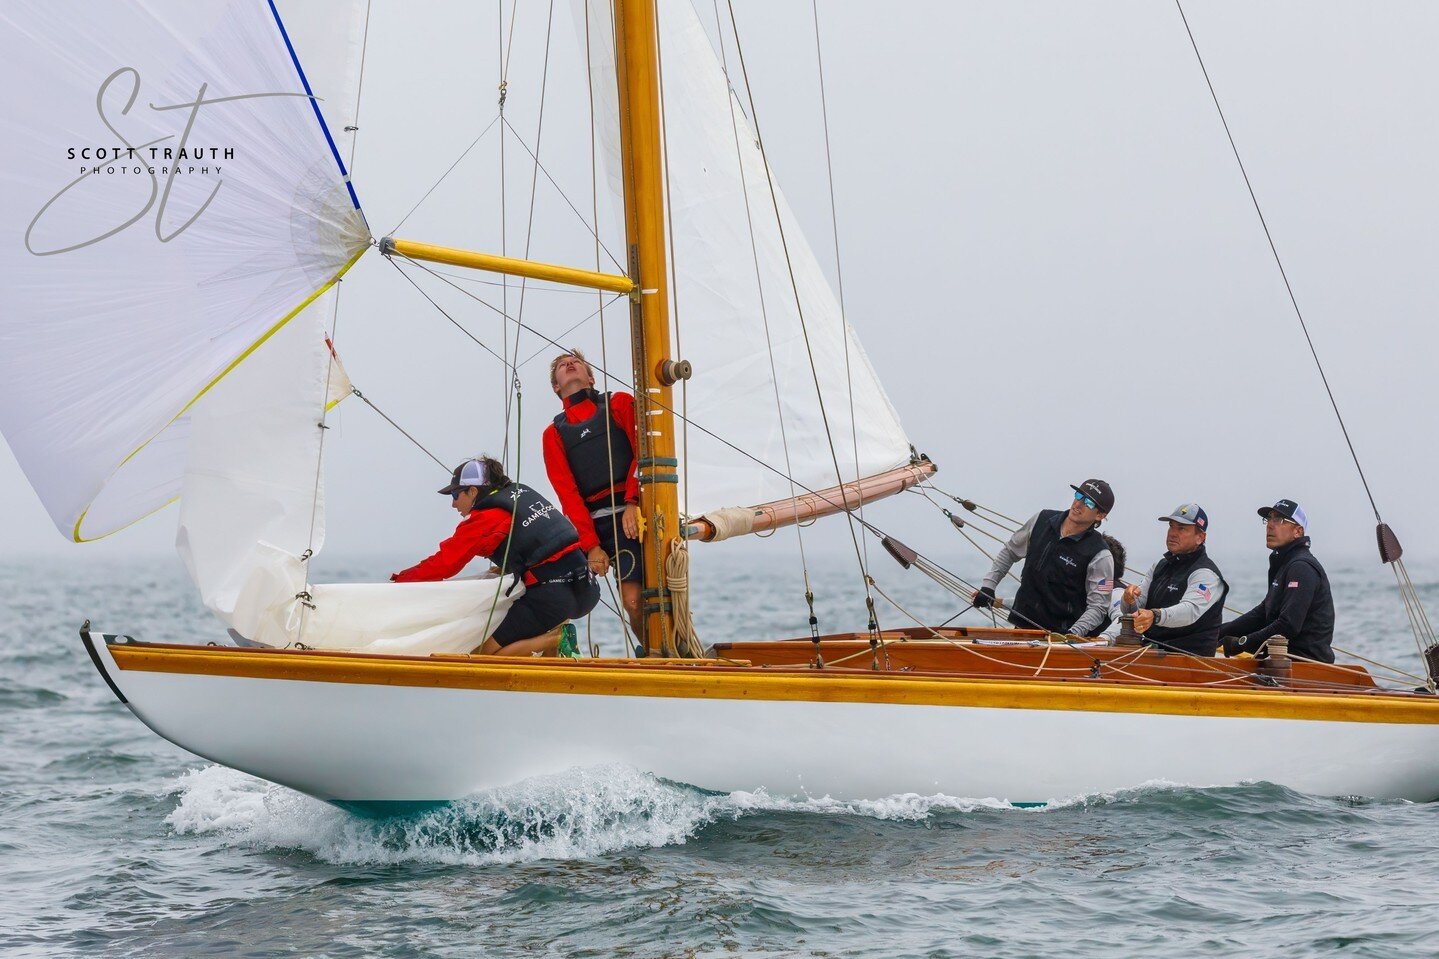 #frontendfriday
Tomorrow is the start of the 2023 Tiedemann Classics Regatta!
Here is a look back to the 2021 edition of this event.
Pictured is Classic Gamecock with @allisongfitz and @max.hooker doing the foredeck work!  @gamecocksailing #herreshof